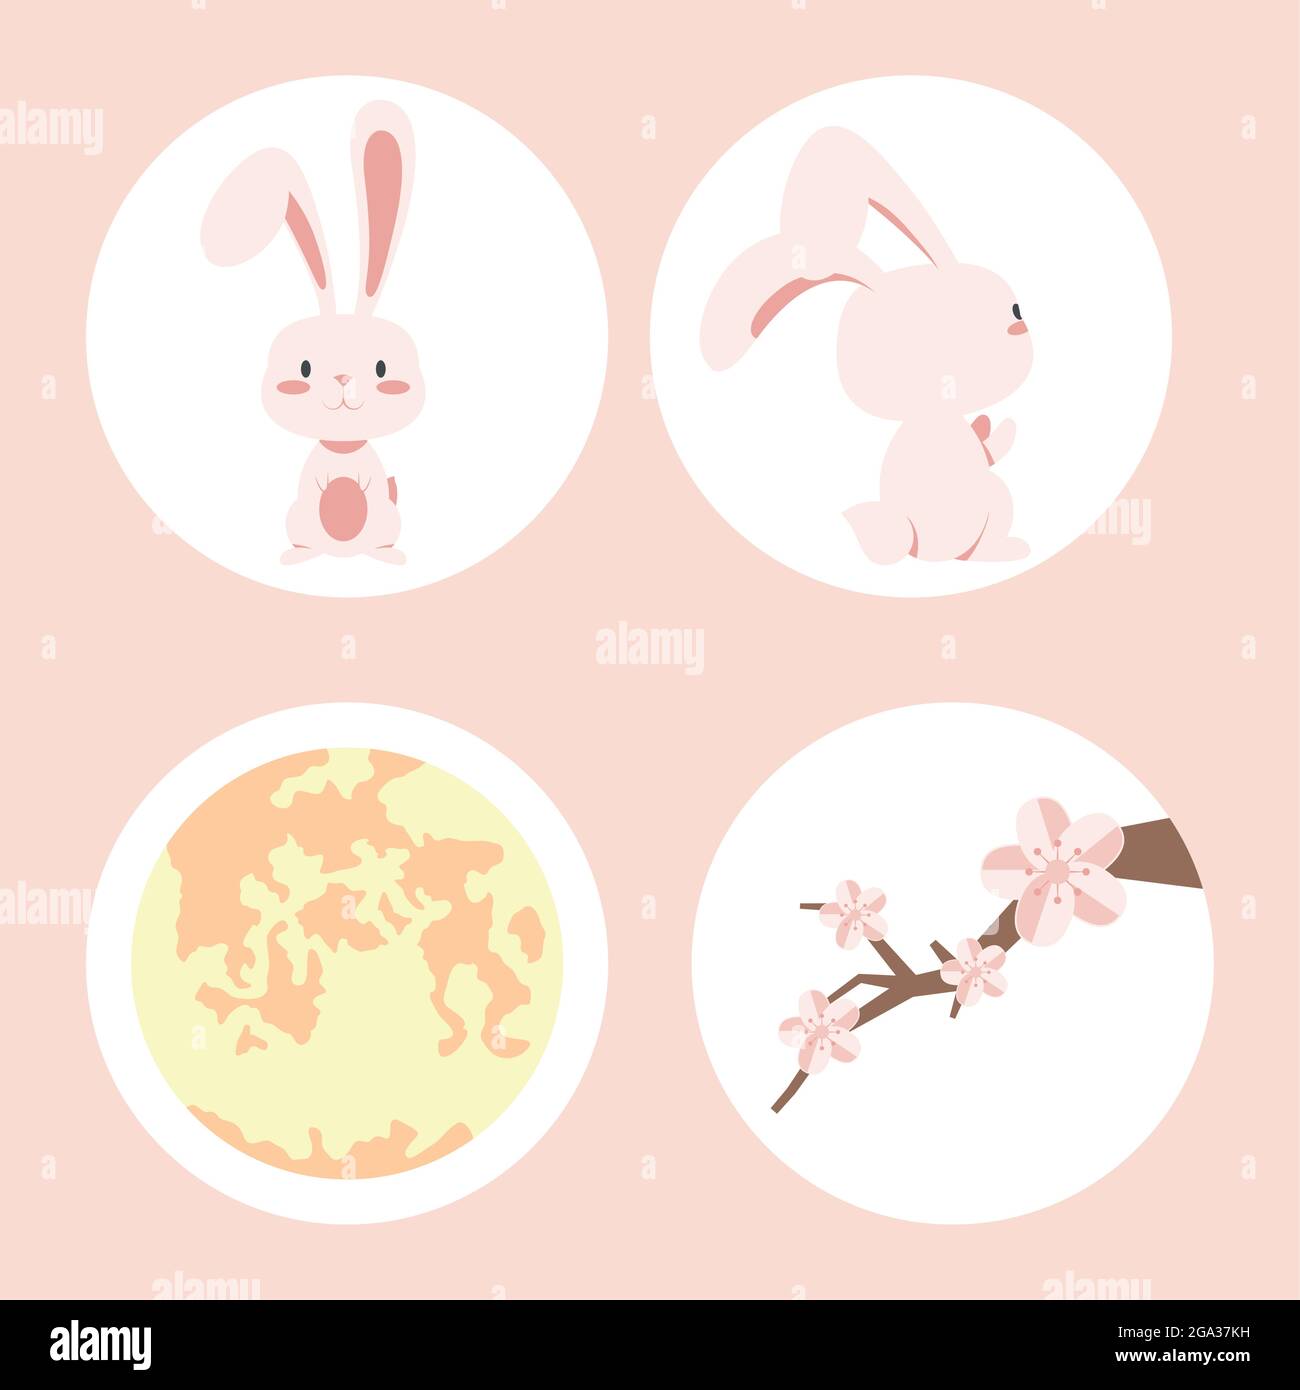 four chinese moon festival set icons Stock Vector